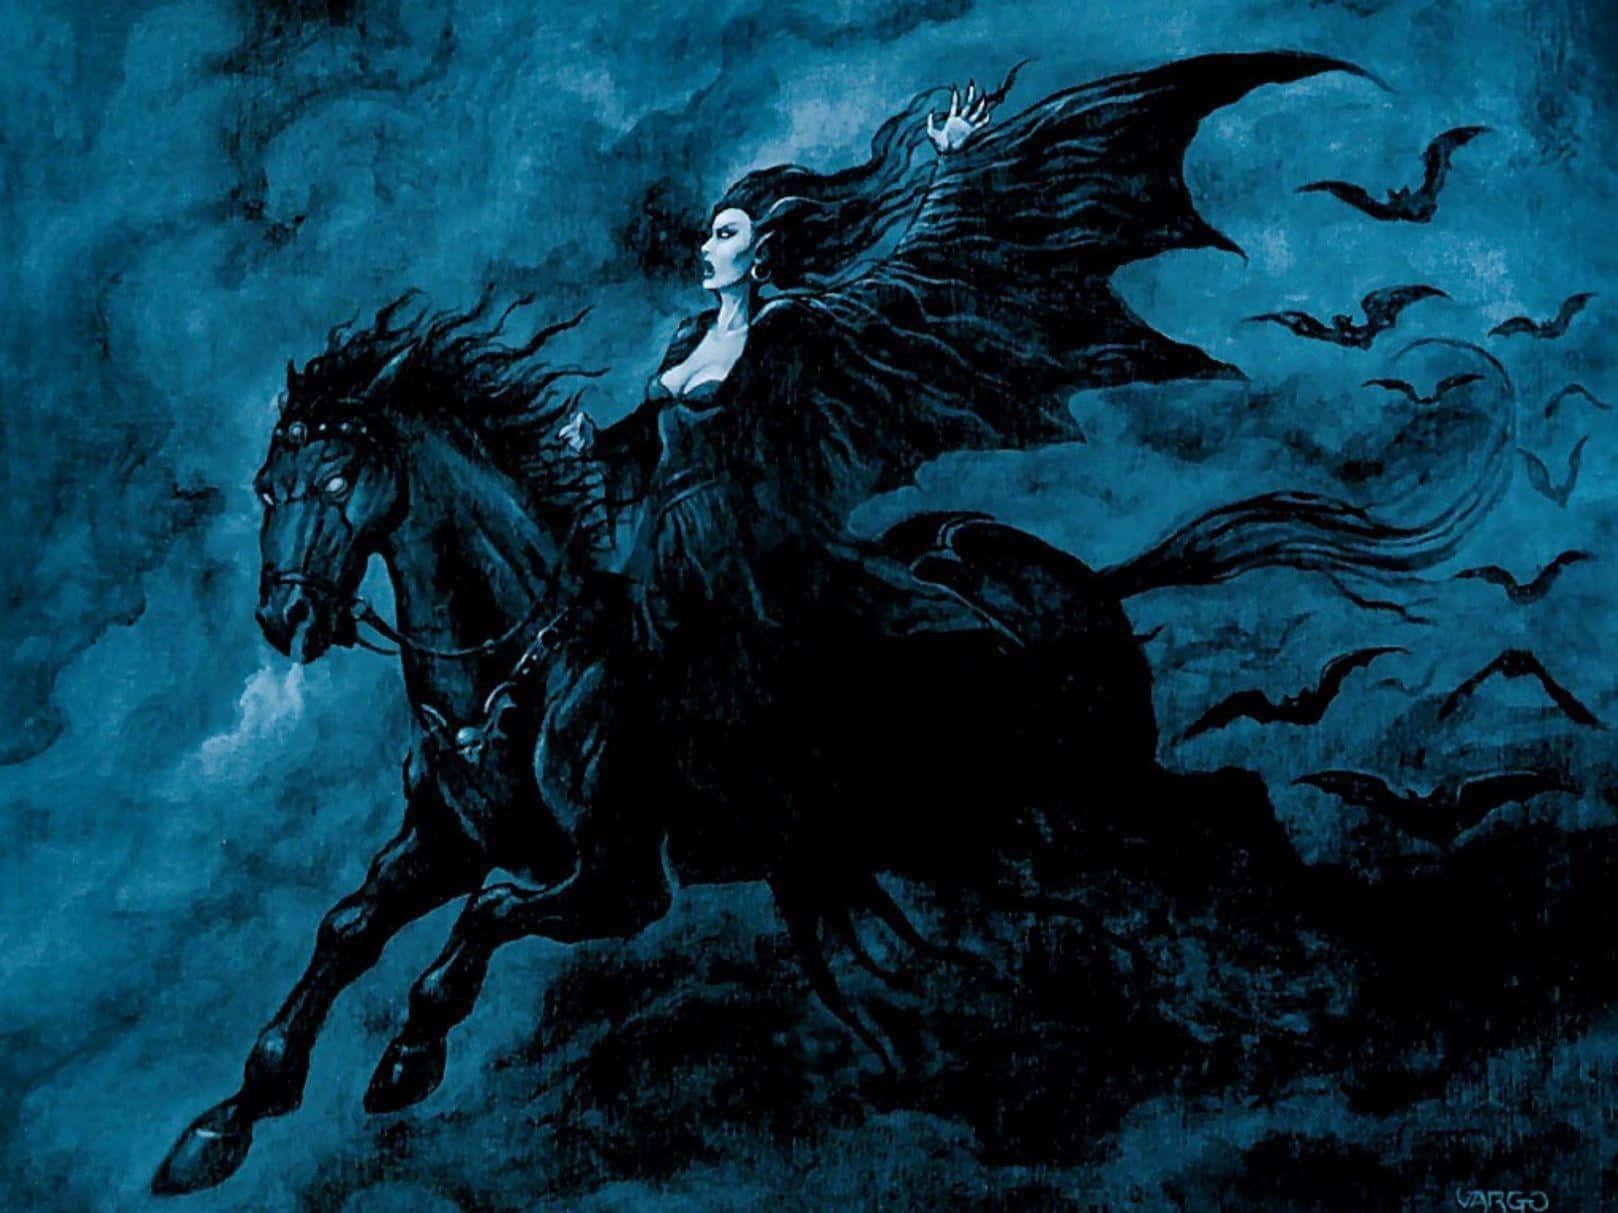 A woman riding on horseback with bats flying around her - Vampire